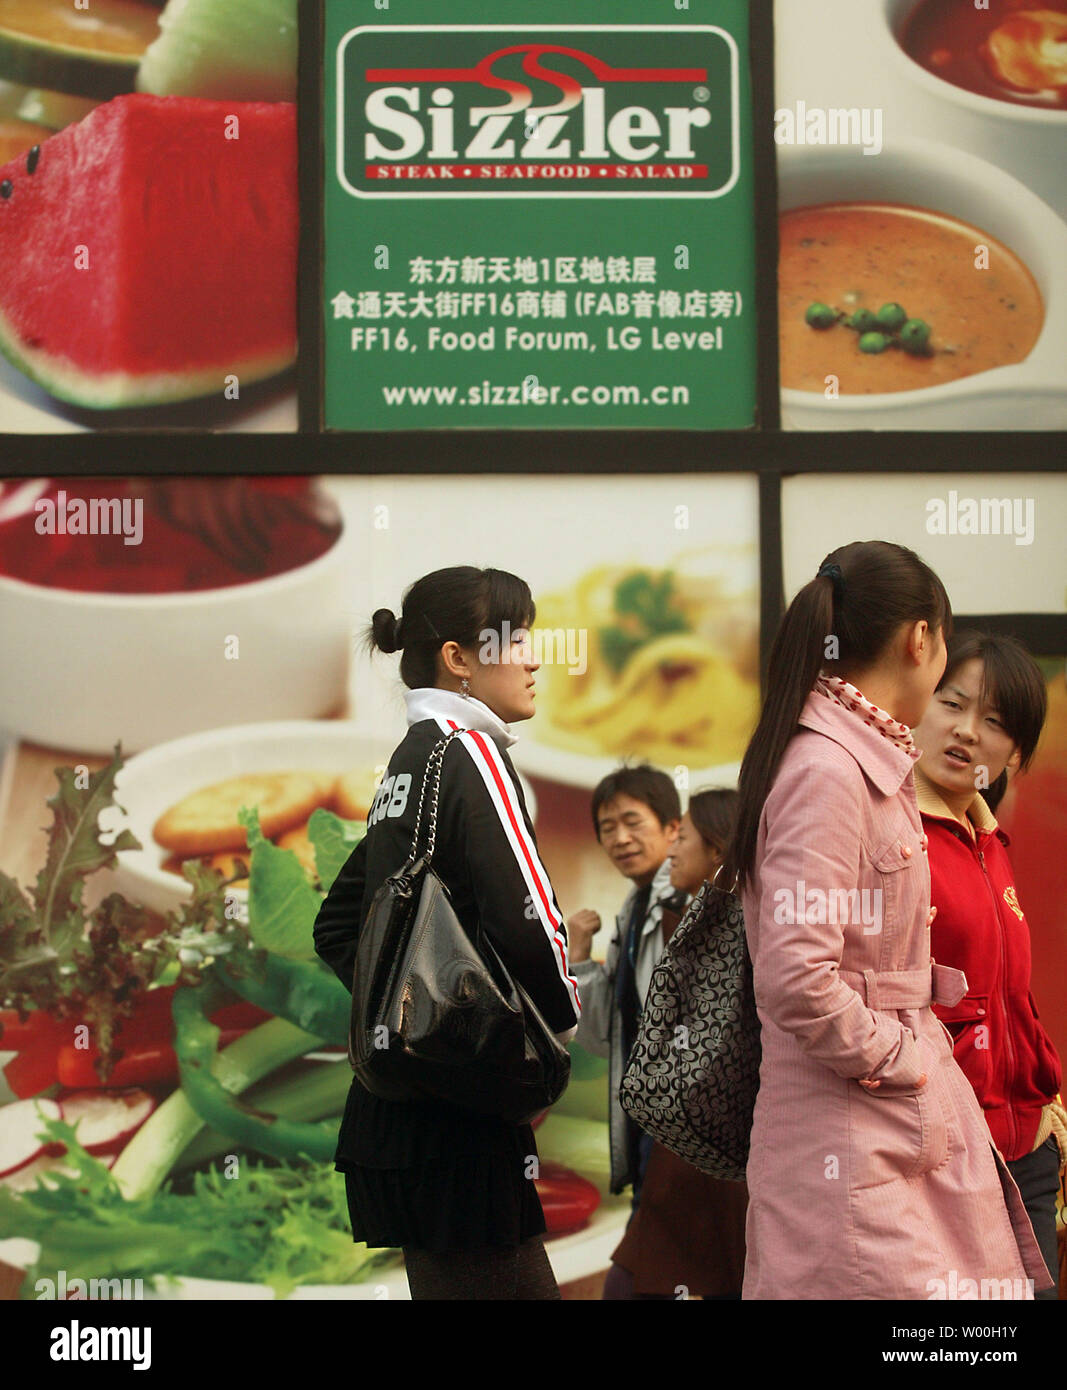 Chinese pedestrians walk past a U.S.-based Sizzler franchise in downtown Beijing, China on November 14, 2007.  Sizzler has joined the ranks of American icons such as McDonalds, Pizza Hut and Kentucky Fried Chicken that have established a strong presence in China.   (UPI Photo/Stephen Shaver) Stock Photo